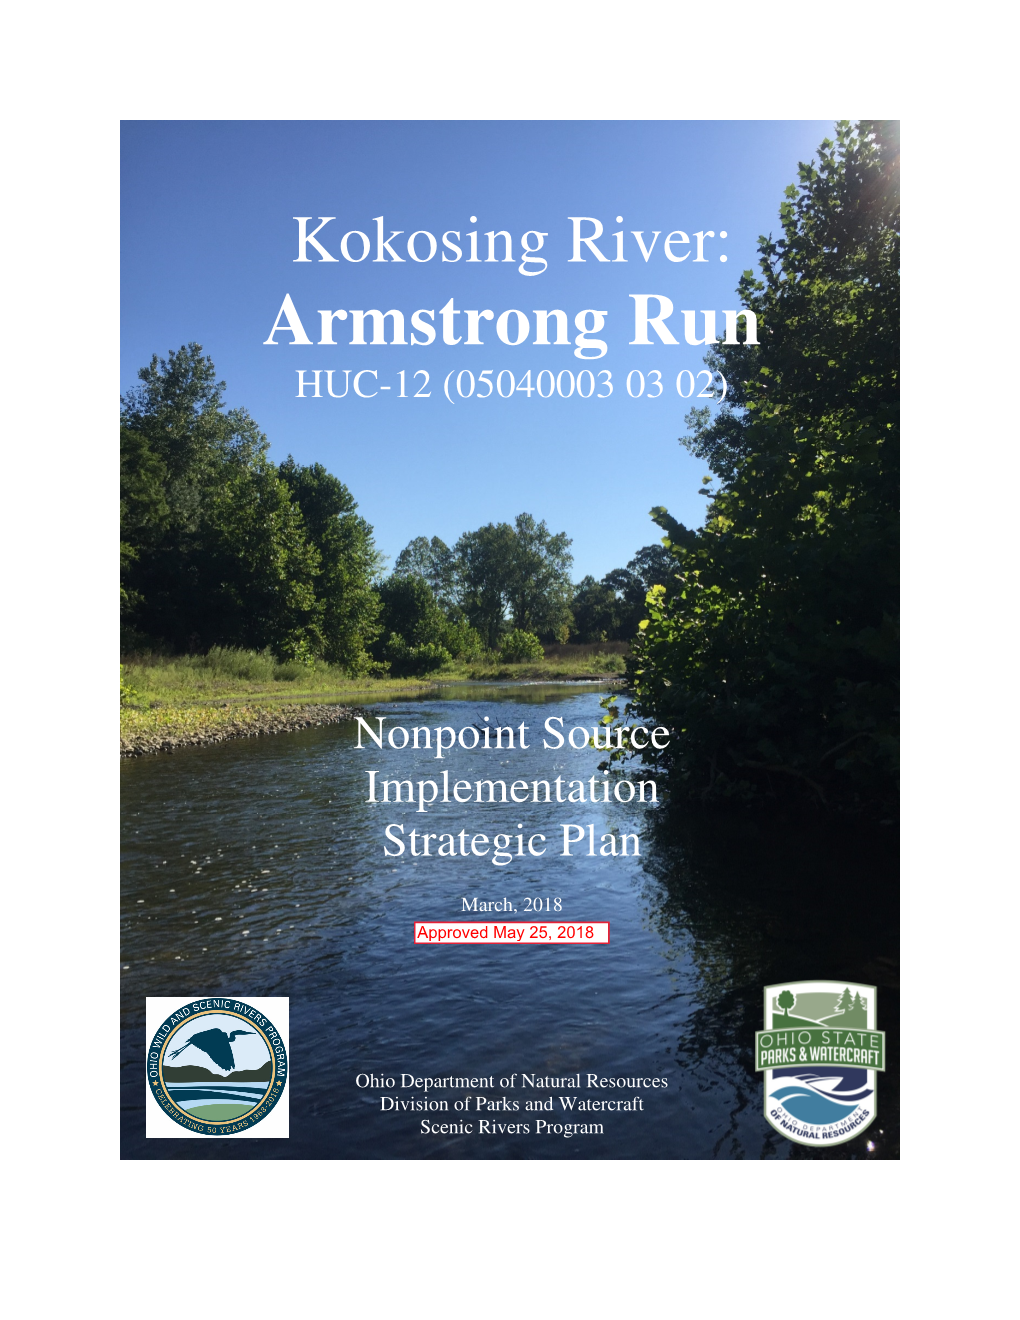 Armstrong Run Approved Nonpoint Source Implementation Strategic Plan